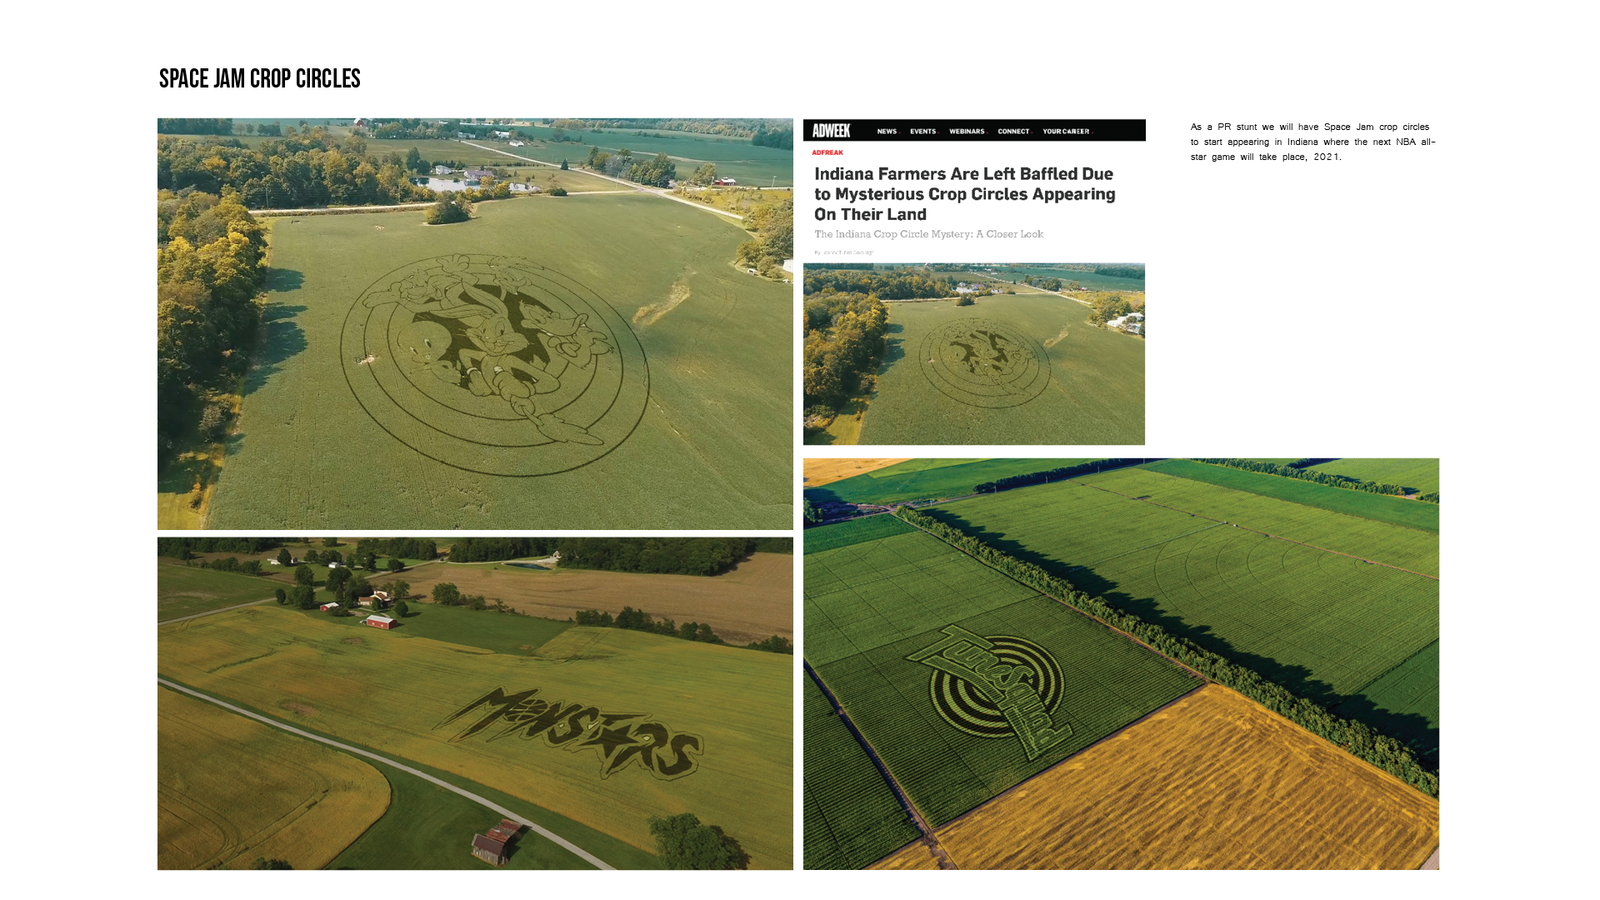 Looney Tunes themed crop circles will appear around Indiana farms.